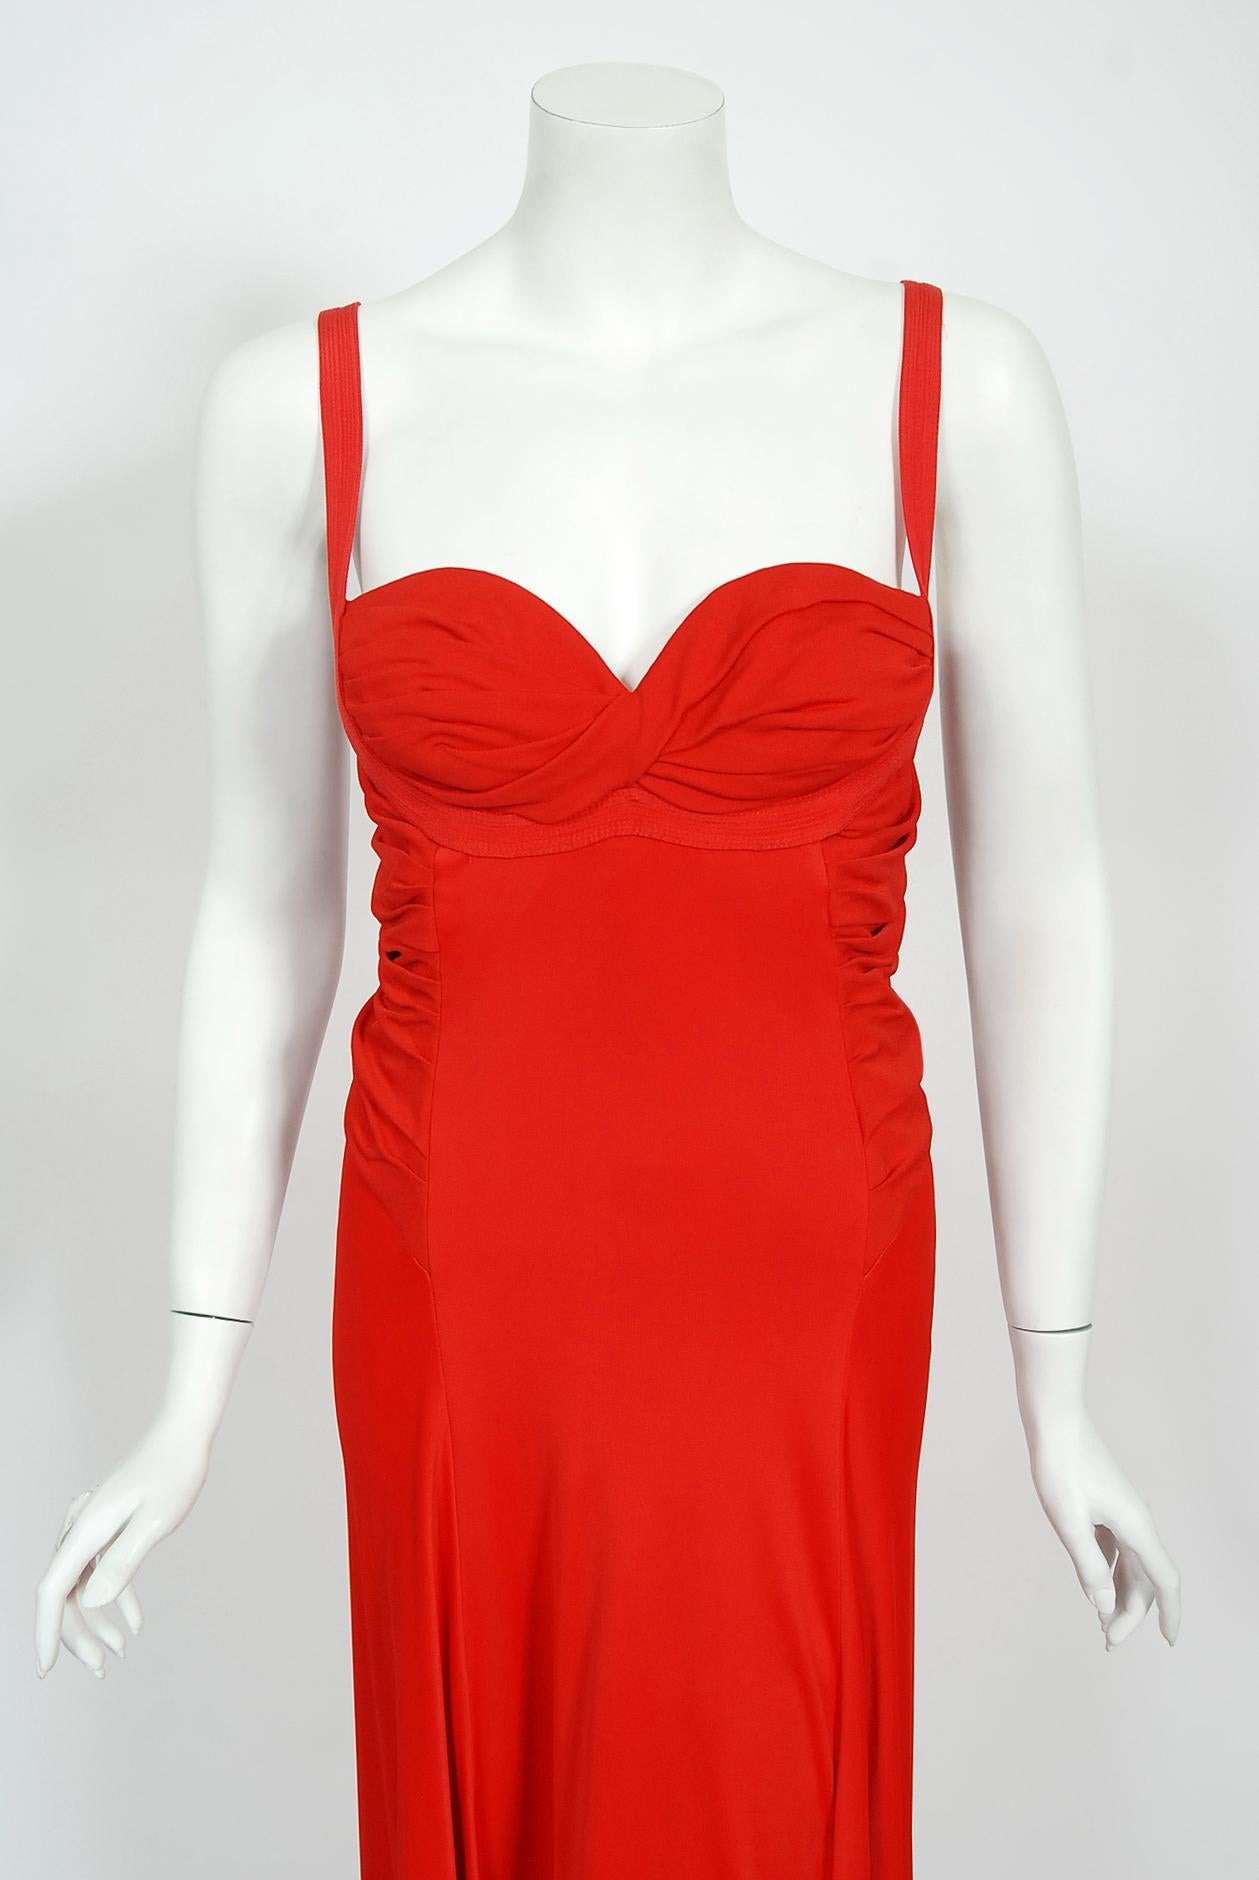 Vintage 1993 Gianni Versace Couture Documented Red Silk Bustier High-Slits Gown 1